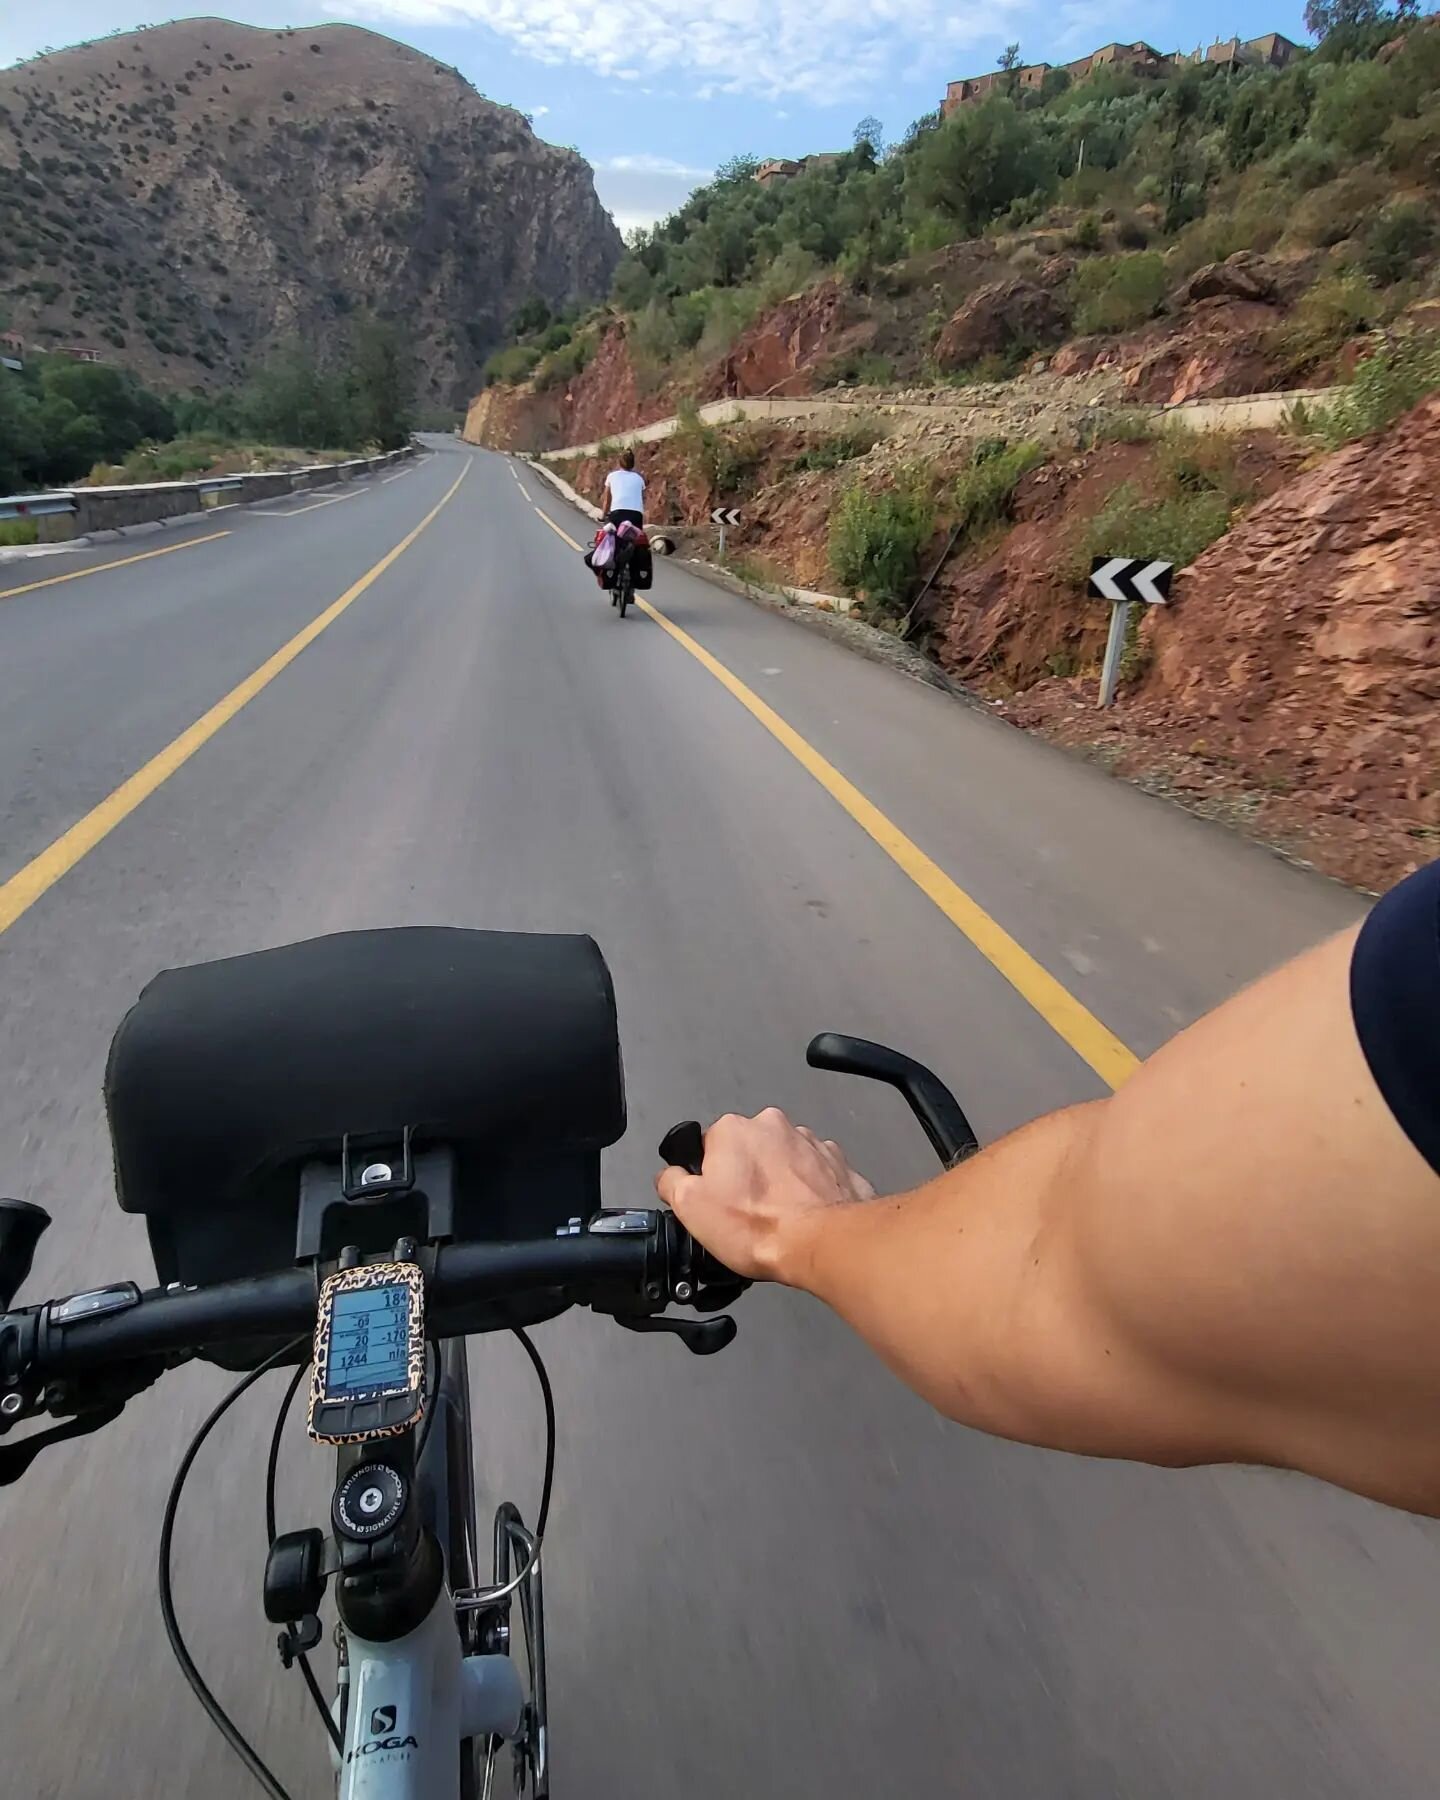 What a day! This morning we started off early to conquer the 32 km climb to Tizi n'Tichka. 

The climb was long and steady, but half way through Margot her bicycle chain broke.. at the best possible timing! We had just passed a small village where a 